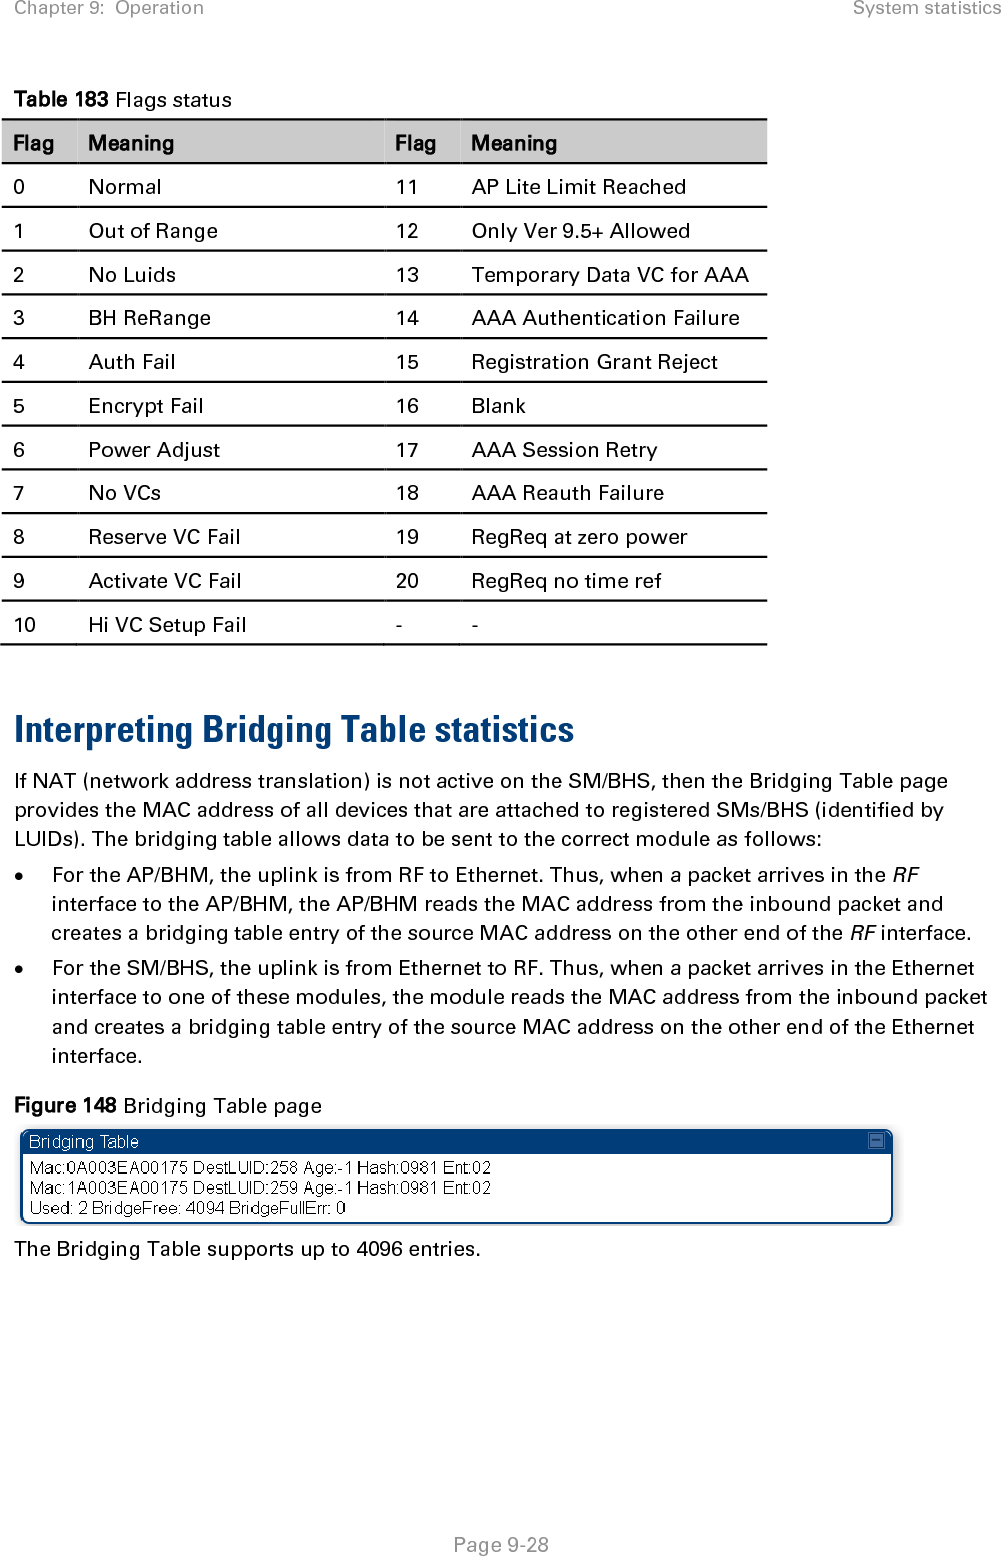 Chapter 9:  Operation System statistics   Page 9-28 Table 183 Flags status Flag Meaning Flag Meaning 0  Normal 11 AP Lite Limit Reached 1  Out of Range 12 Only Ver 9.5+ Allowed 2  No Luids 13 Temporary Data VC for AAA 3  BH ReRange 14 AAA Authentication Failure 4  Auth Fail 15 Registration Grant Reject 5  Encrypt Fail 16 Blank 6  Power Adjust 17 AAA Session Retry 7  No VCs 18 AAA Reauth Failure 8  Reserve VC Fail 19 RegReq at zero power 9  Activate VC Fail 20 RegReq no time ref 10 Hi VC Setup Fail  -  -  Interpreting Bridging Table statistics If NAT (network address translation) is not active on the SM/BHS, then the Bridging Table page provides the MAC address of all devices that are attached to registered SMs/BHS (identified by LUIDs). The bridging table allows data to be sent to the correct module as follows: • For the AP/BHM, the uplink is from RF to Ethernet. Thus, when a packet arrives in the RF interface to the AP/BHM, the AP/BHM reads the MAC address from the inbound packet and creates a bridging table entry of the source MAC address on the other end of the RF interface. • For the SM/BHS, the uplink is from Ethernet to RF. Thus, when a packet arrives in the Ethernet interface to one of these modules, the module reads the MAC address from the inbound packet and creates a bridging table entry of the source MAC address on the other end of the Ethernet interface. Figure 148 Bridging Table page  The Bridging Table supports up to 4096 entries. 